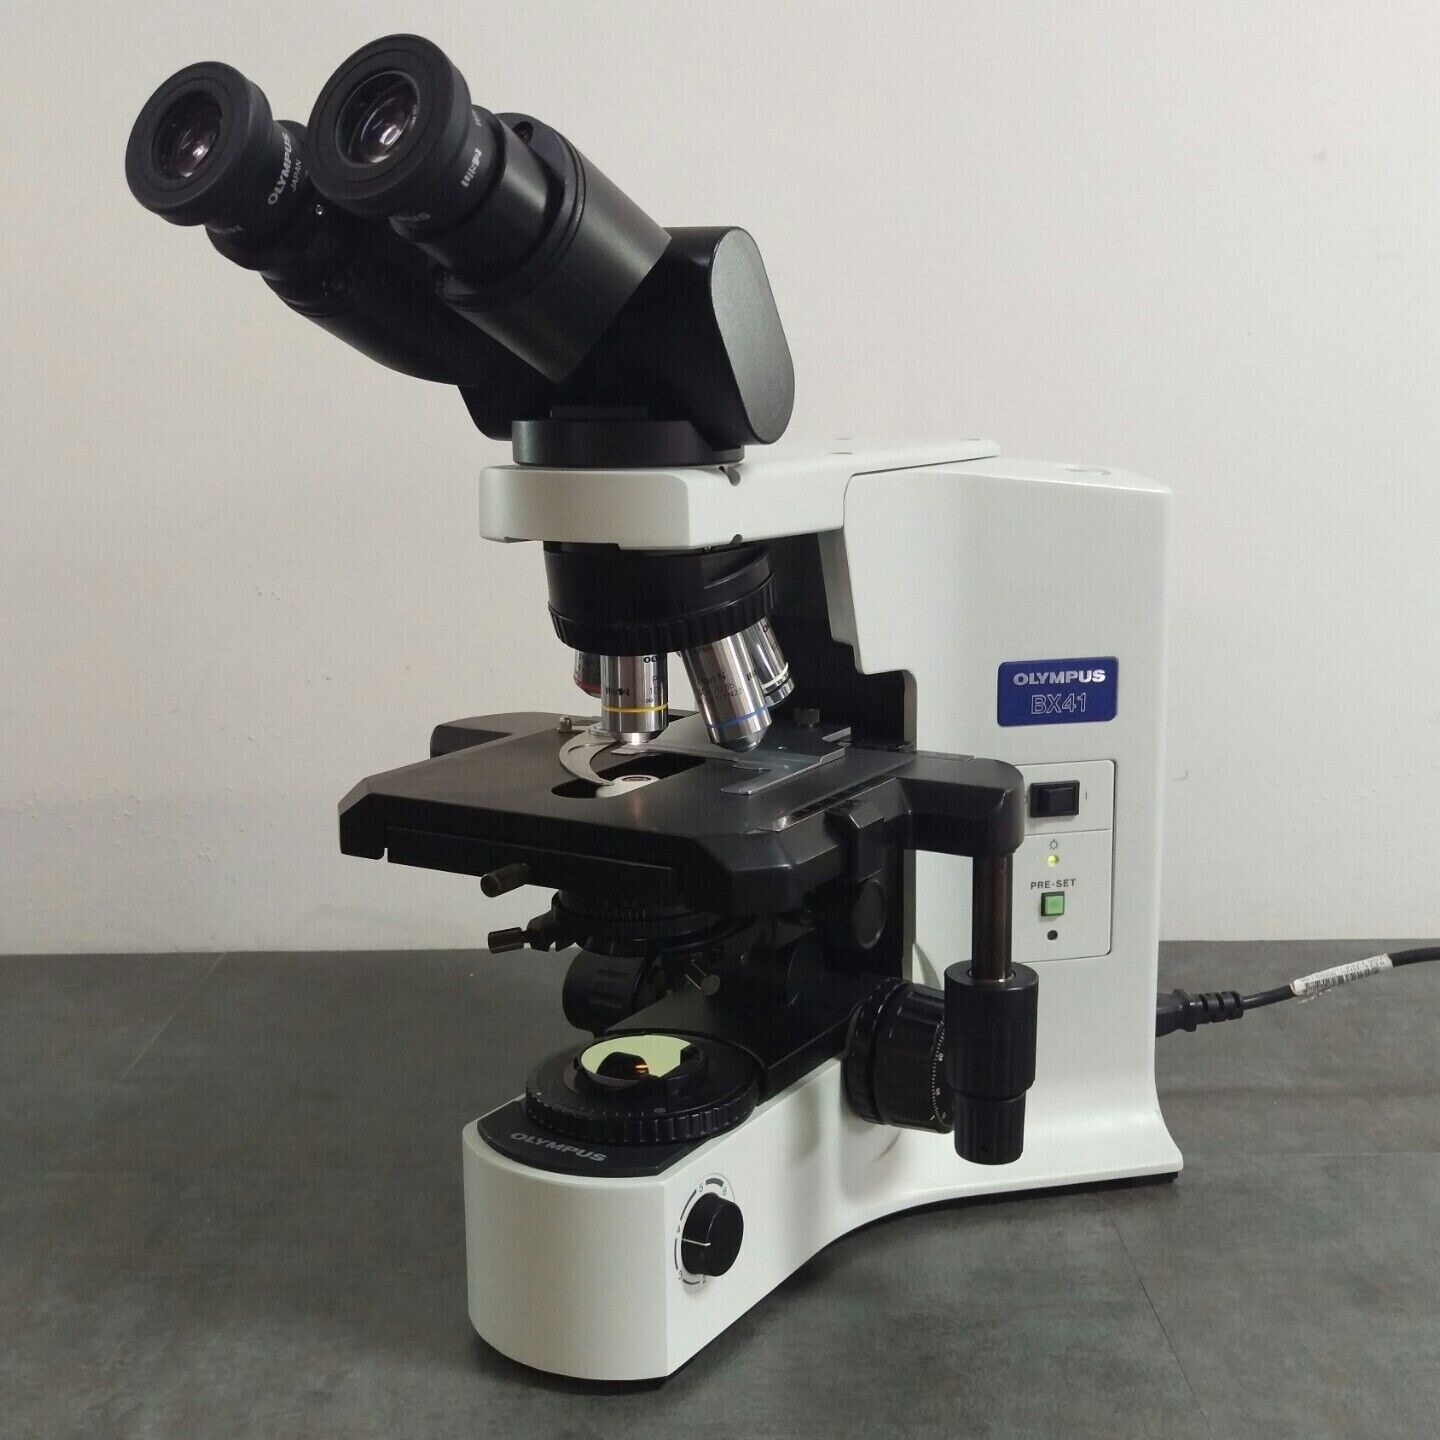 Olympus Microscope BX41 NEW Old Stock with Tilting Head and 100x Objective - microscopemarketplace